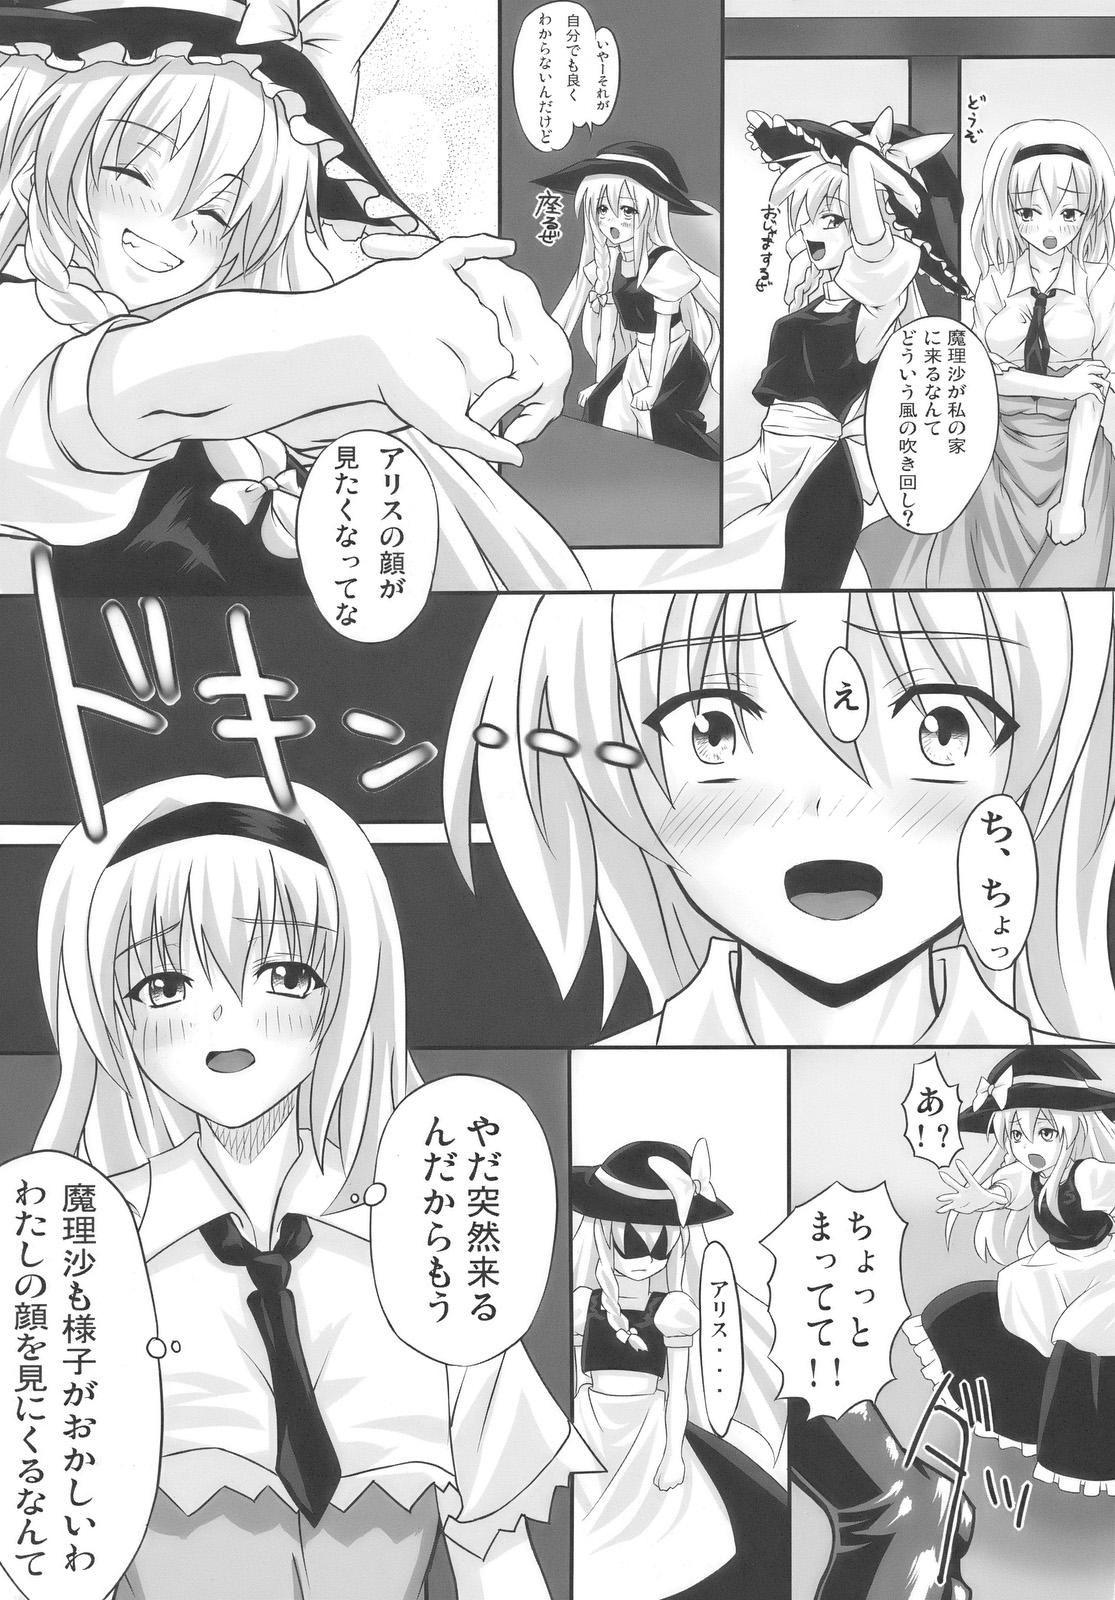 Semen 東方相聞歌 - Touhou project Monstercock - Page 5